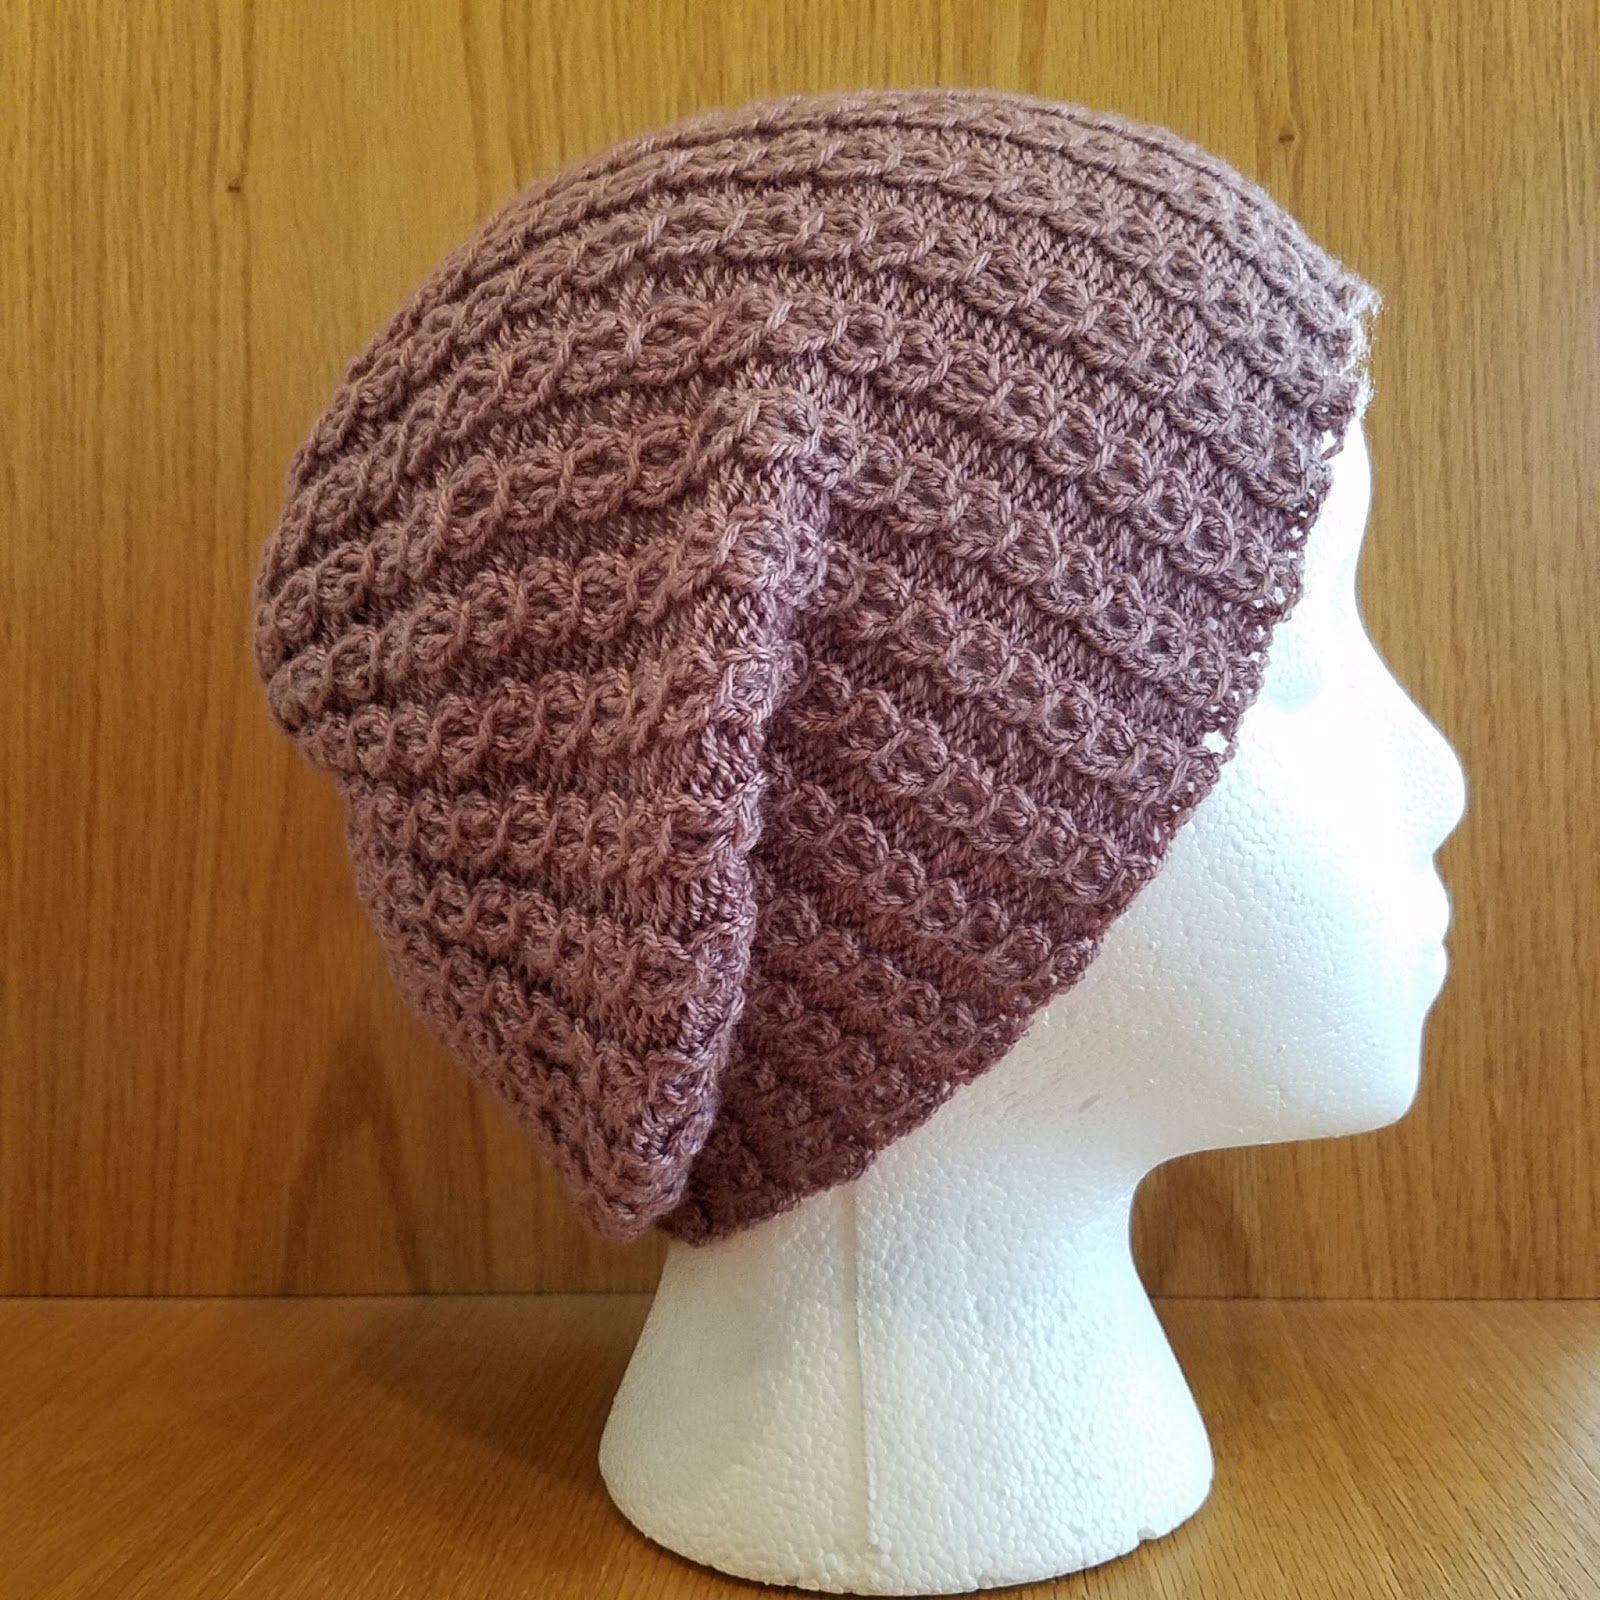 Knice Knitties Shaylah Mock Cable Slouchy Hat